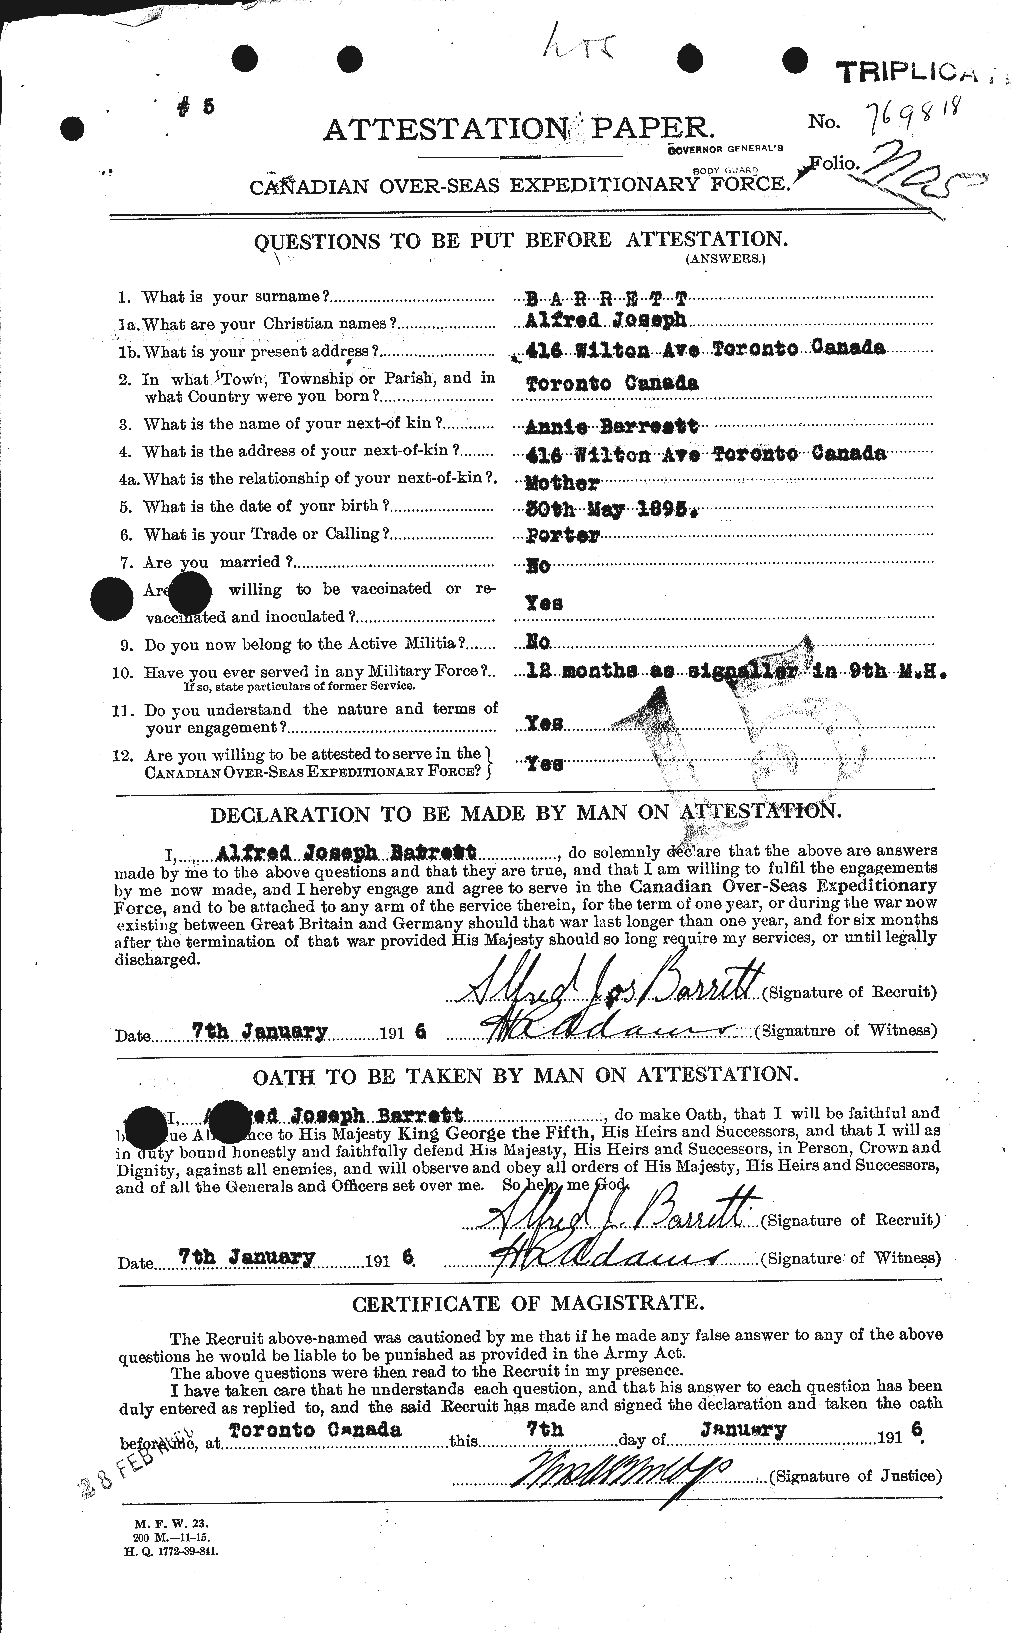 Personnel Records of the First World War - CEF 222257a